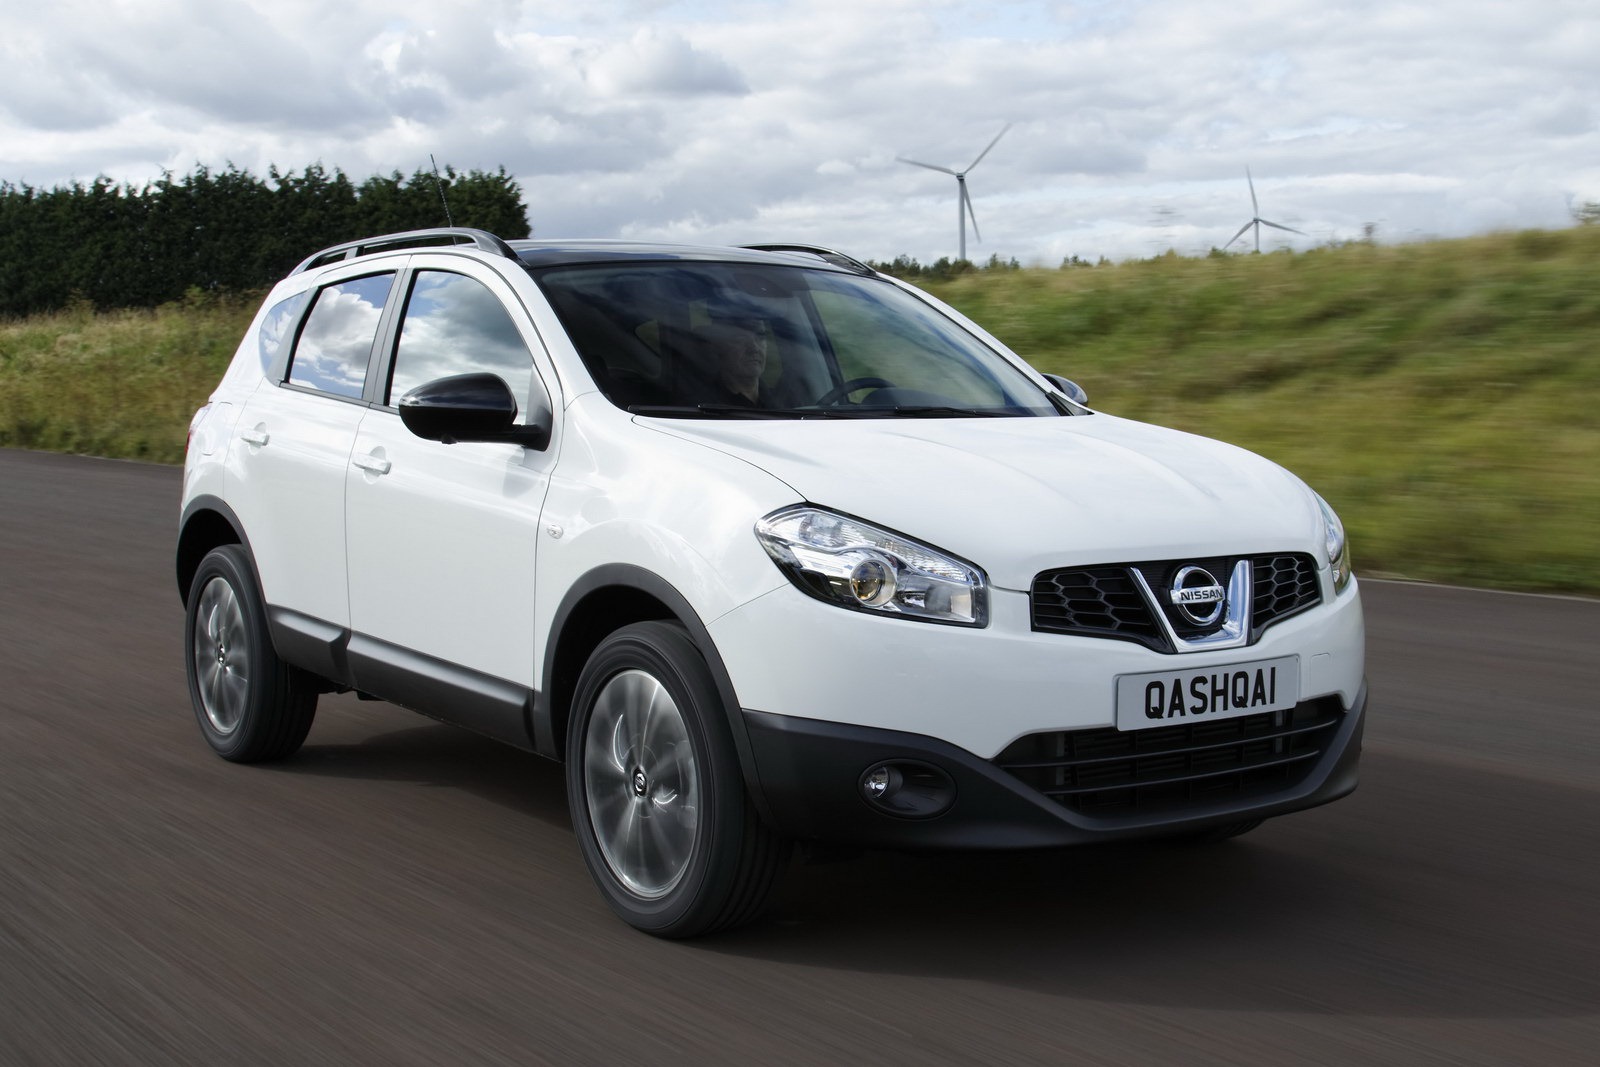 Nissan Qashqai 2013 Review, Amazing Pictures and Images